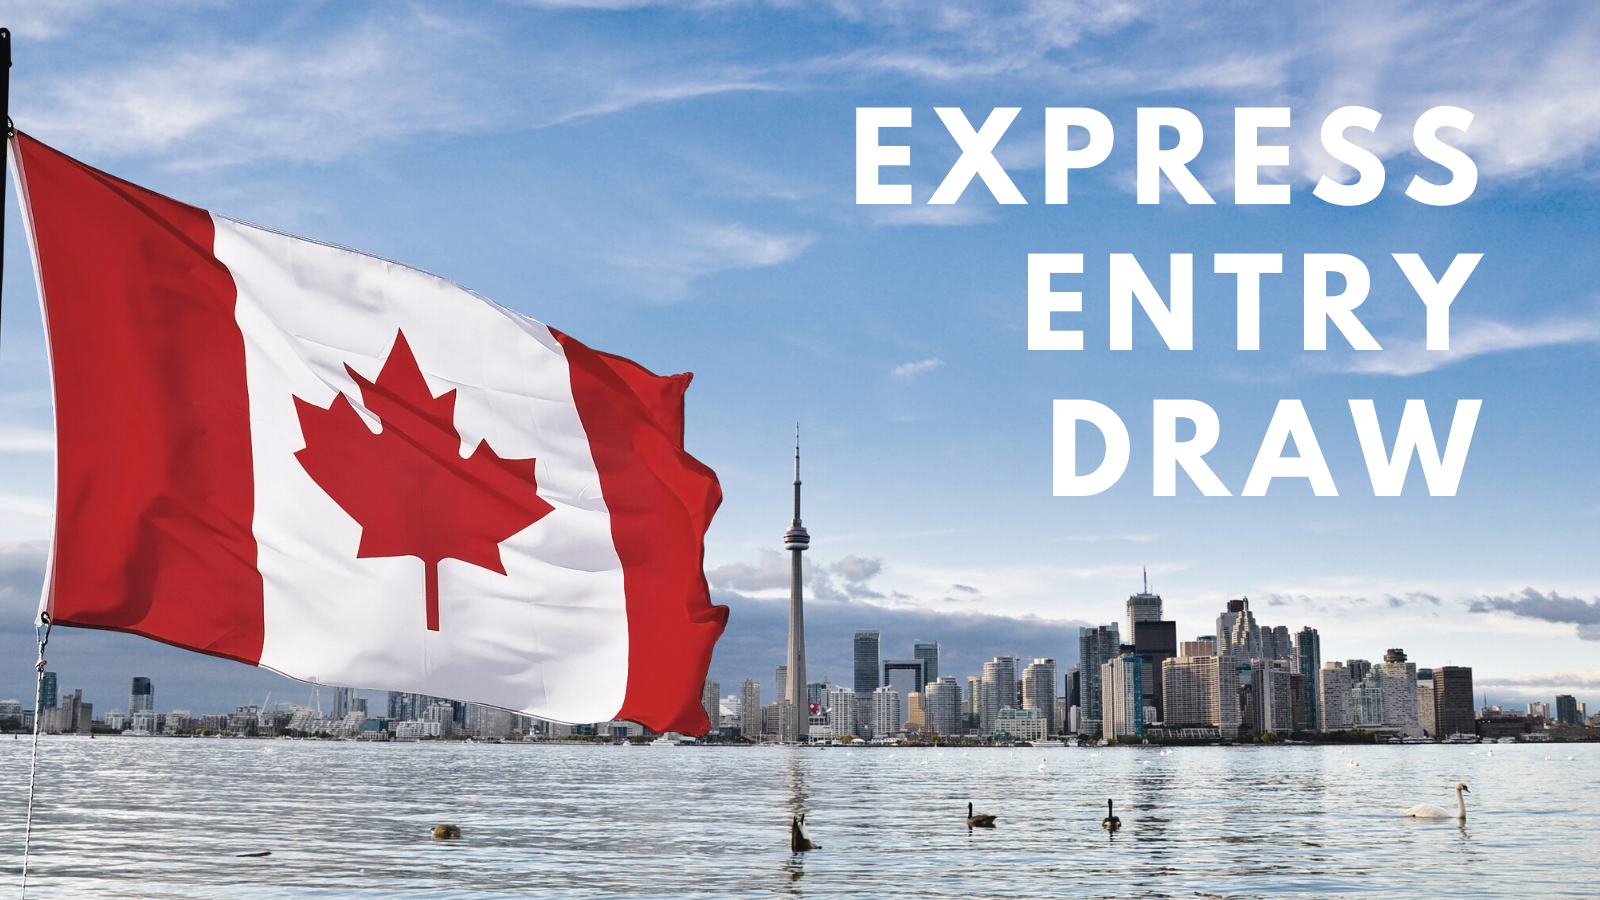 Express Entry Draw 2022 #236 - Latest CRS Score